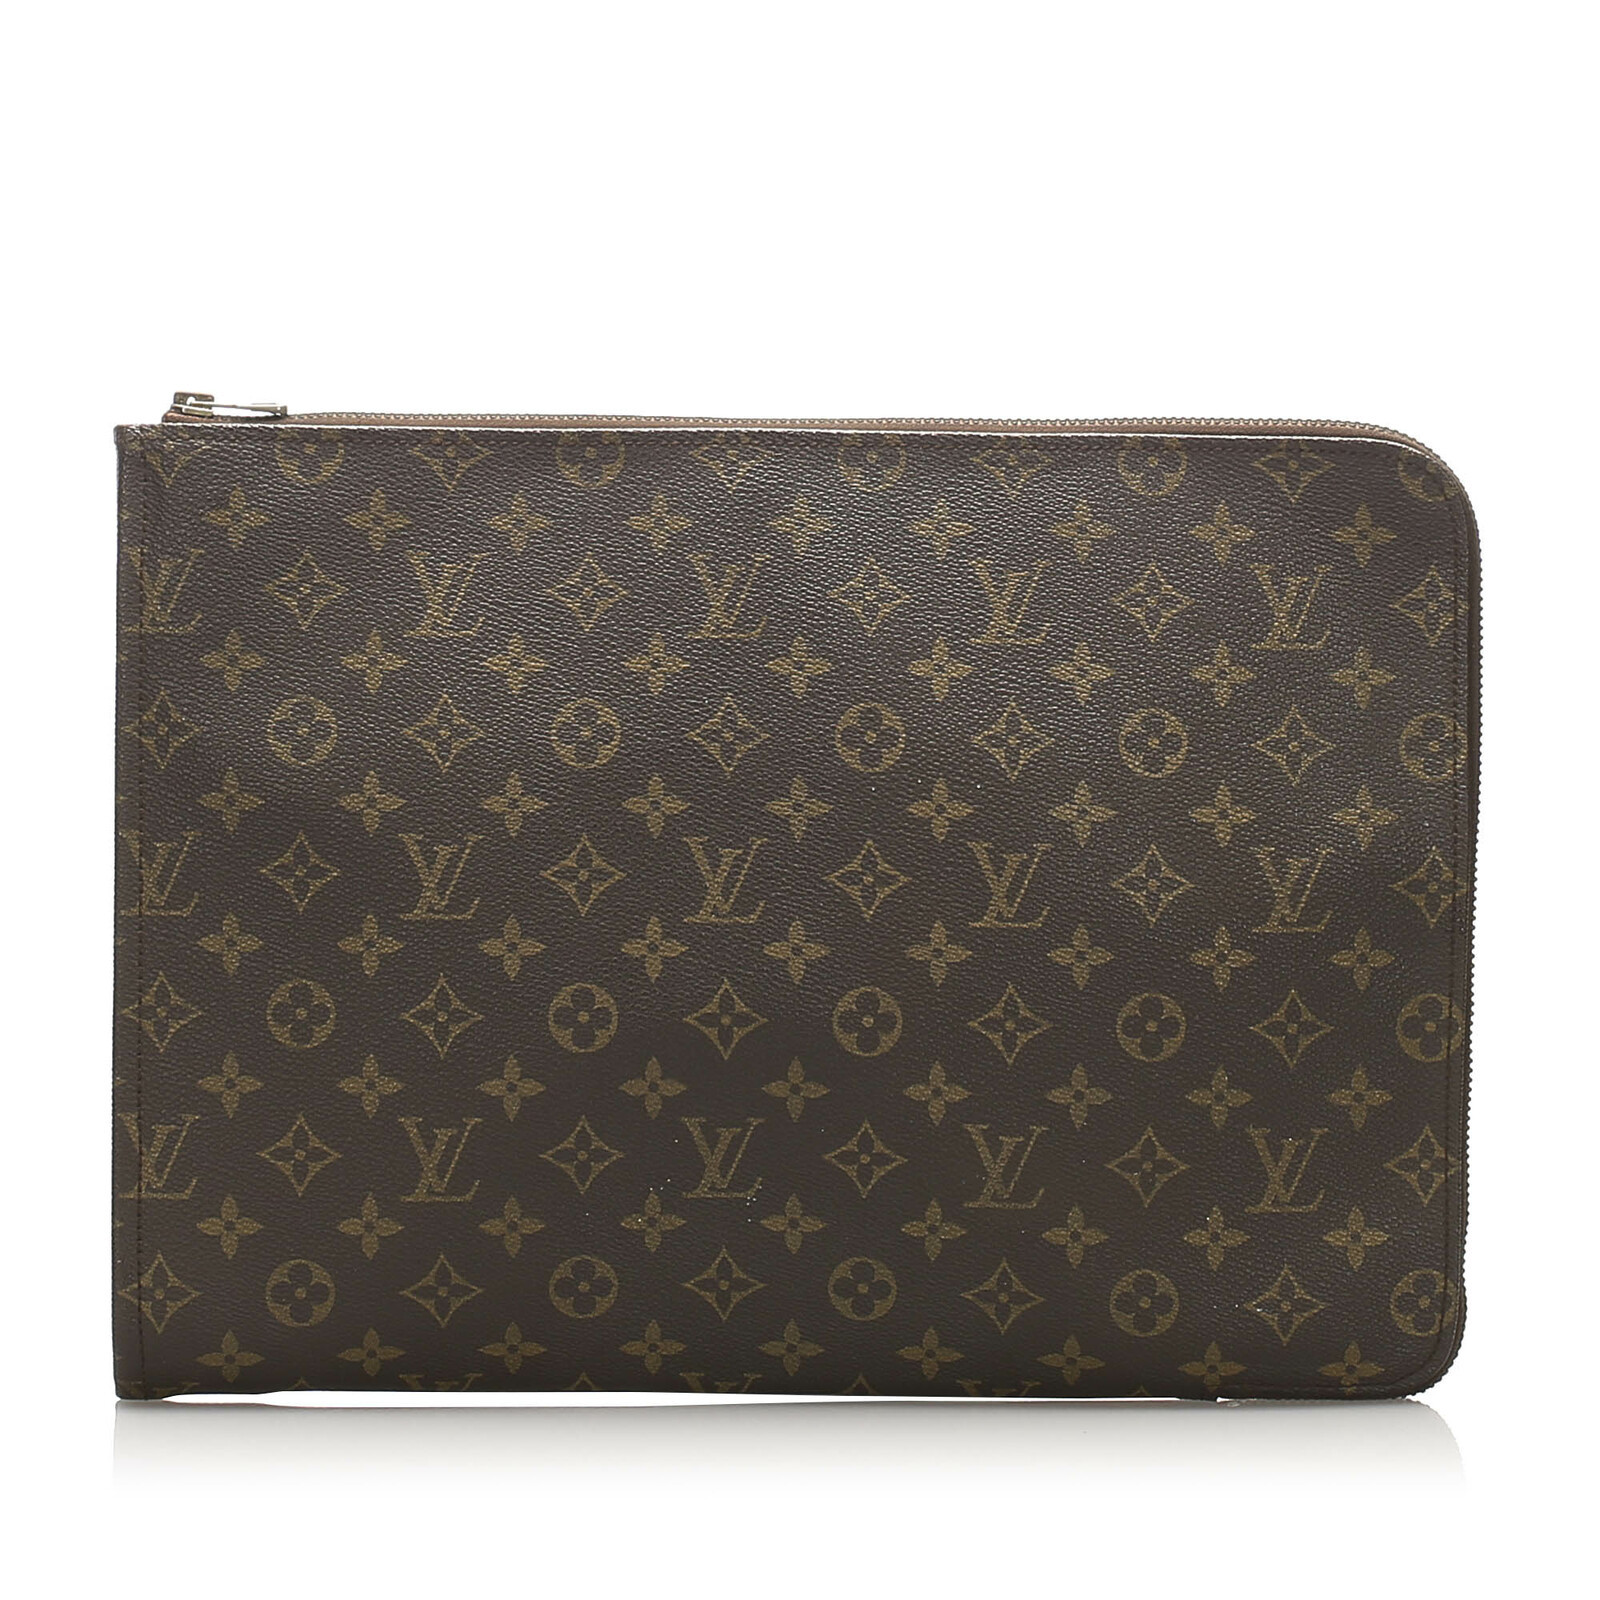 Louis Vuitton Clutch Bag Canvas in Brown - Second Hand Louis Vuitton Clutch  Bag Canvas in Brown buy used for 584€ (4640914)